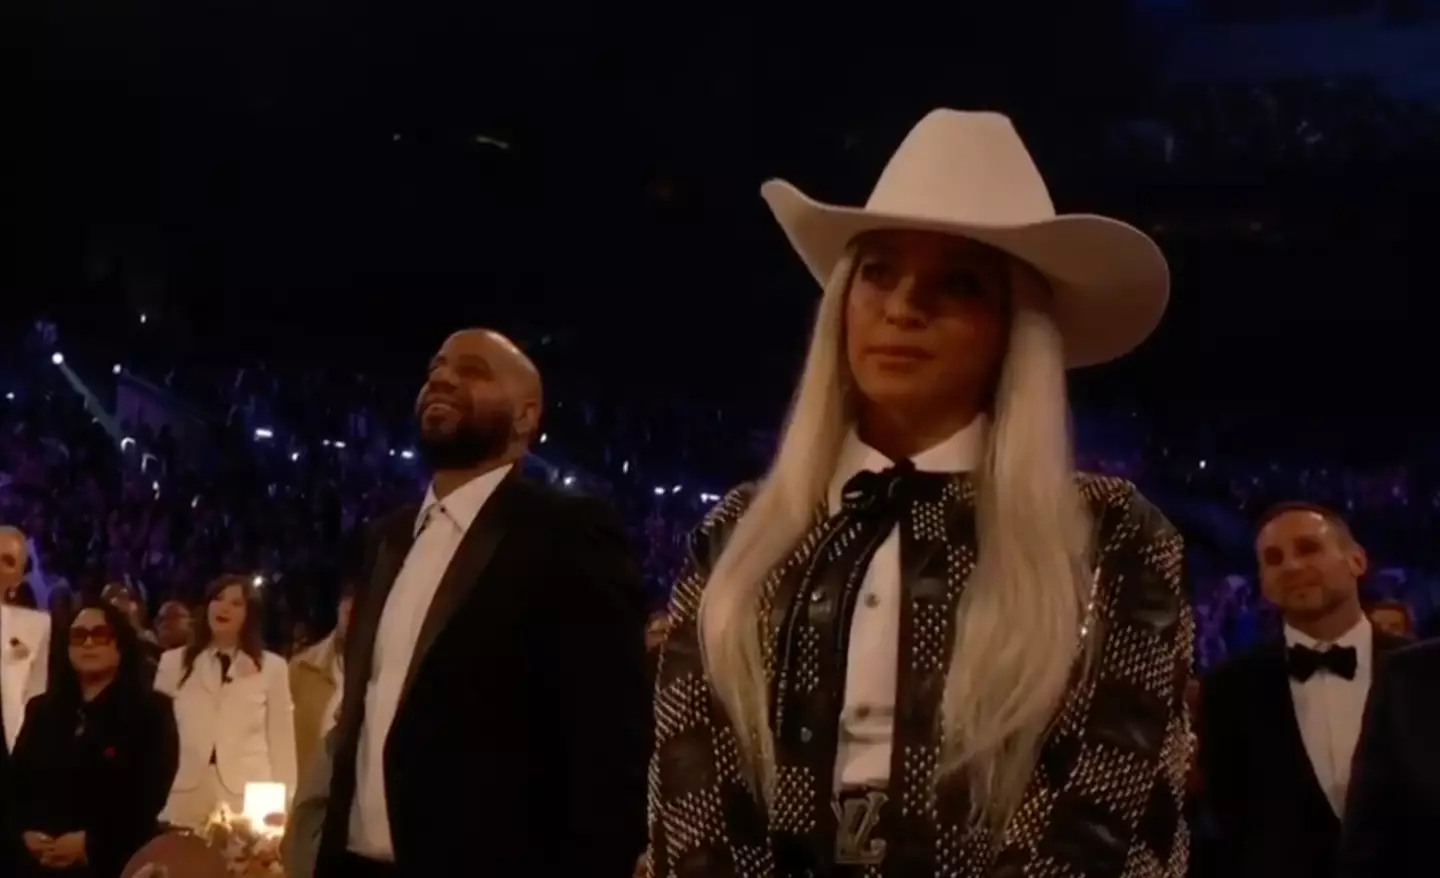 Beyoncé was watching on from her seat.